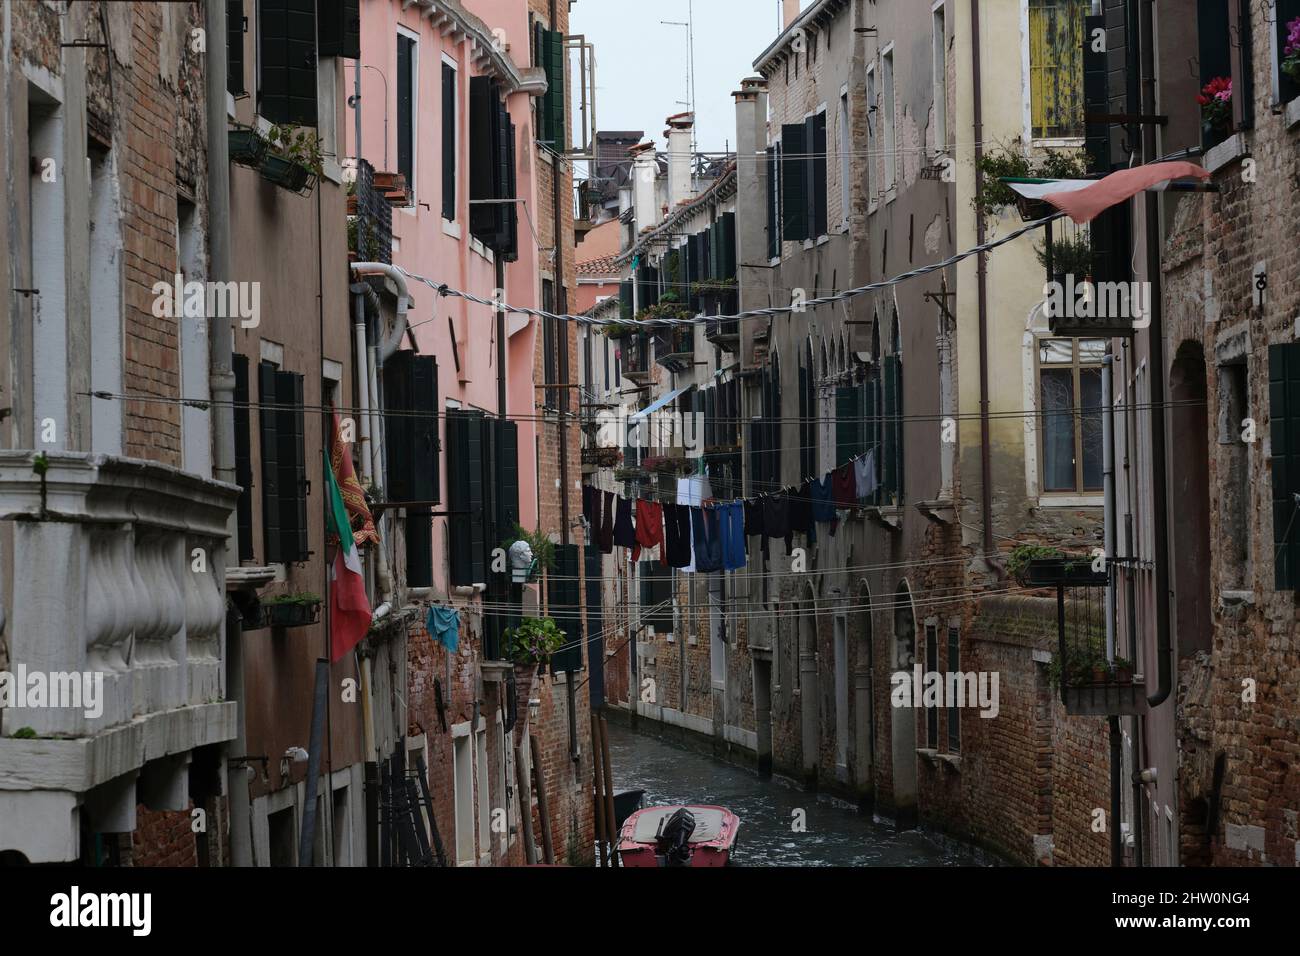 washing hanging out to dry across a canal in venice Stock Photo